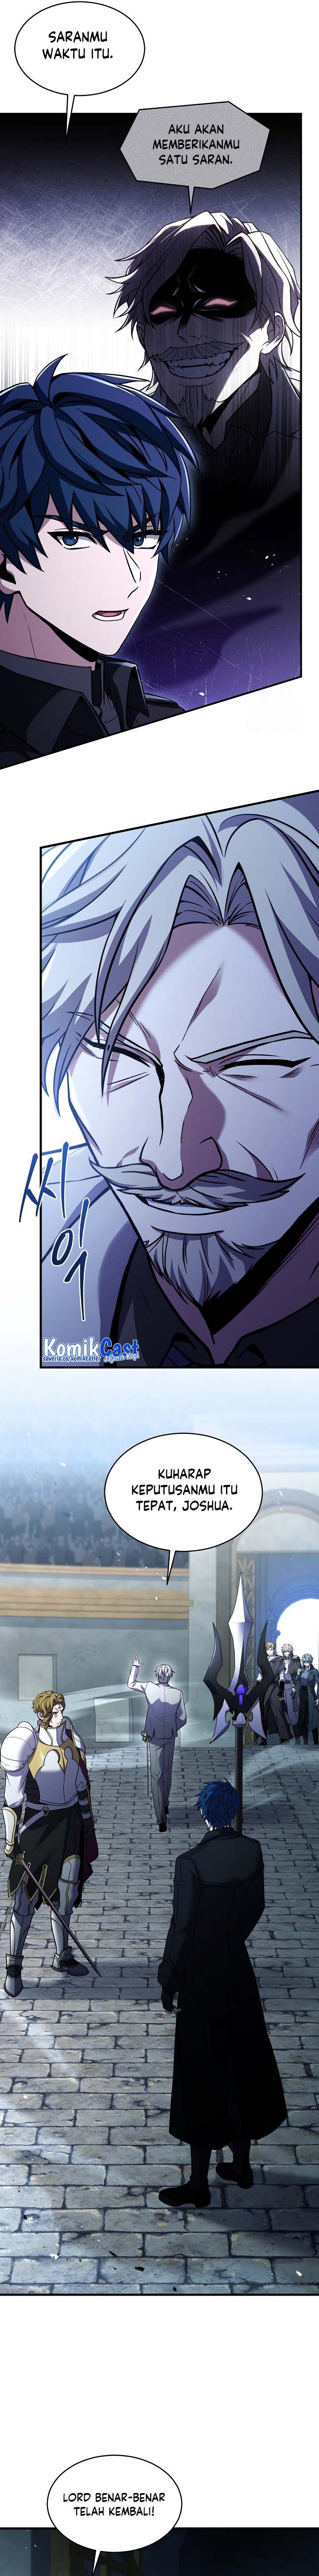 Return Of The Greatest Lancer Chapter 136